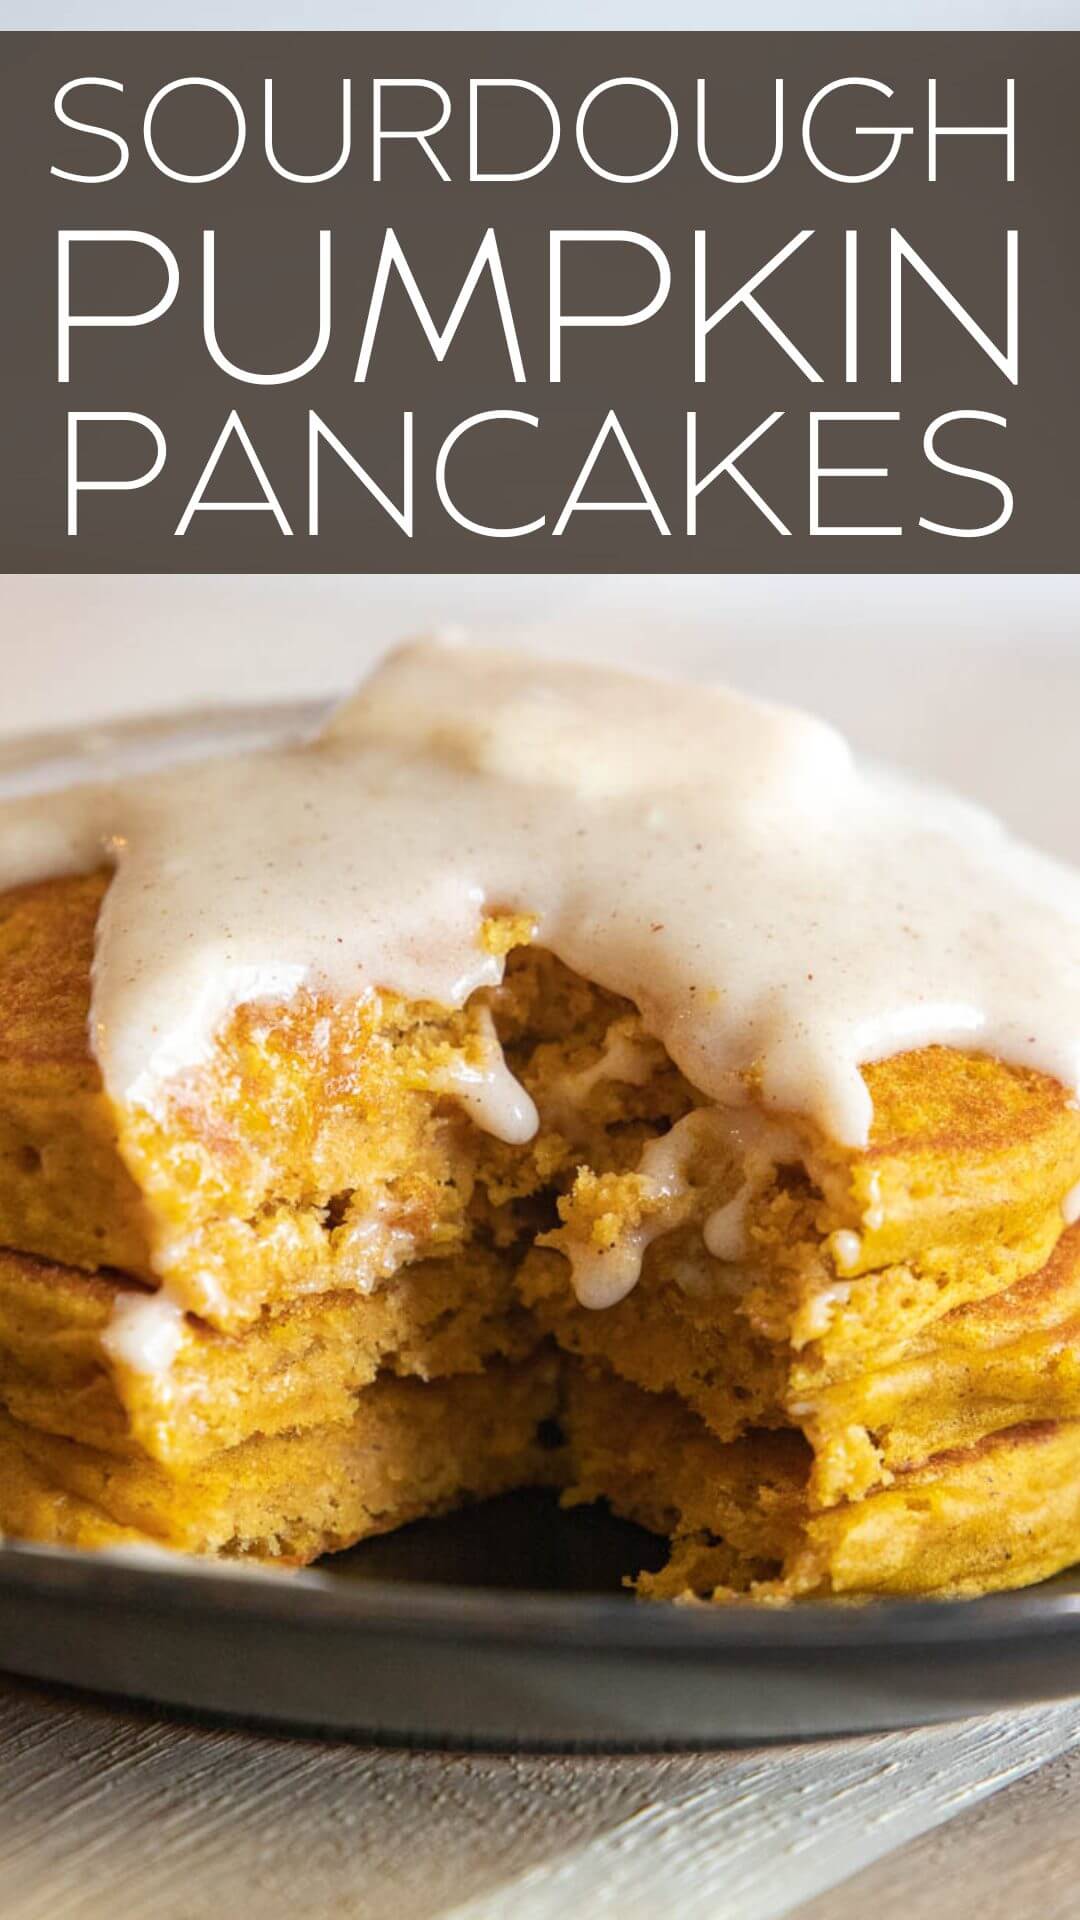 These are the perfect sourdough pumpkin pancakes! If you are a fan of pumpkin, these are perfect for you! Try them and see for yourself.